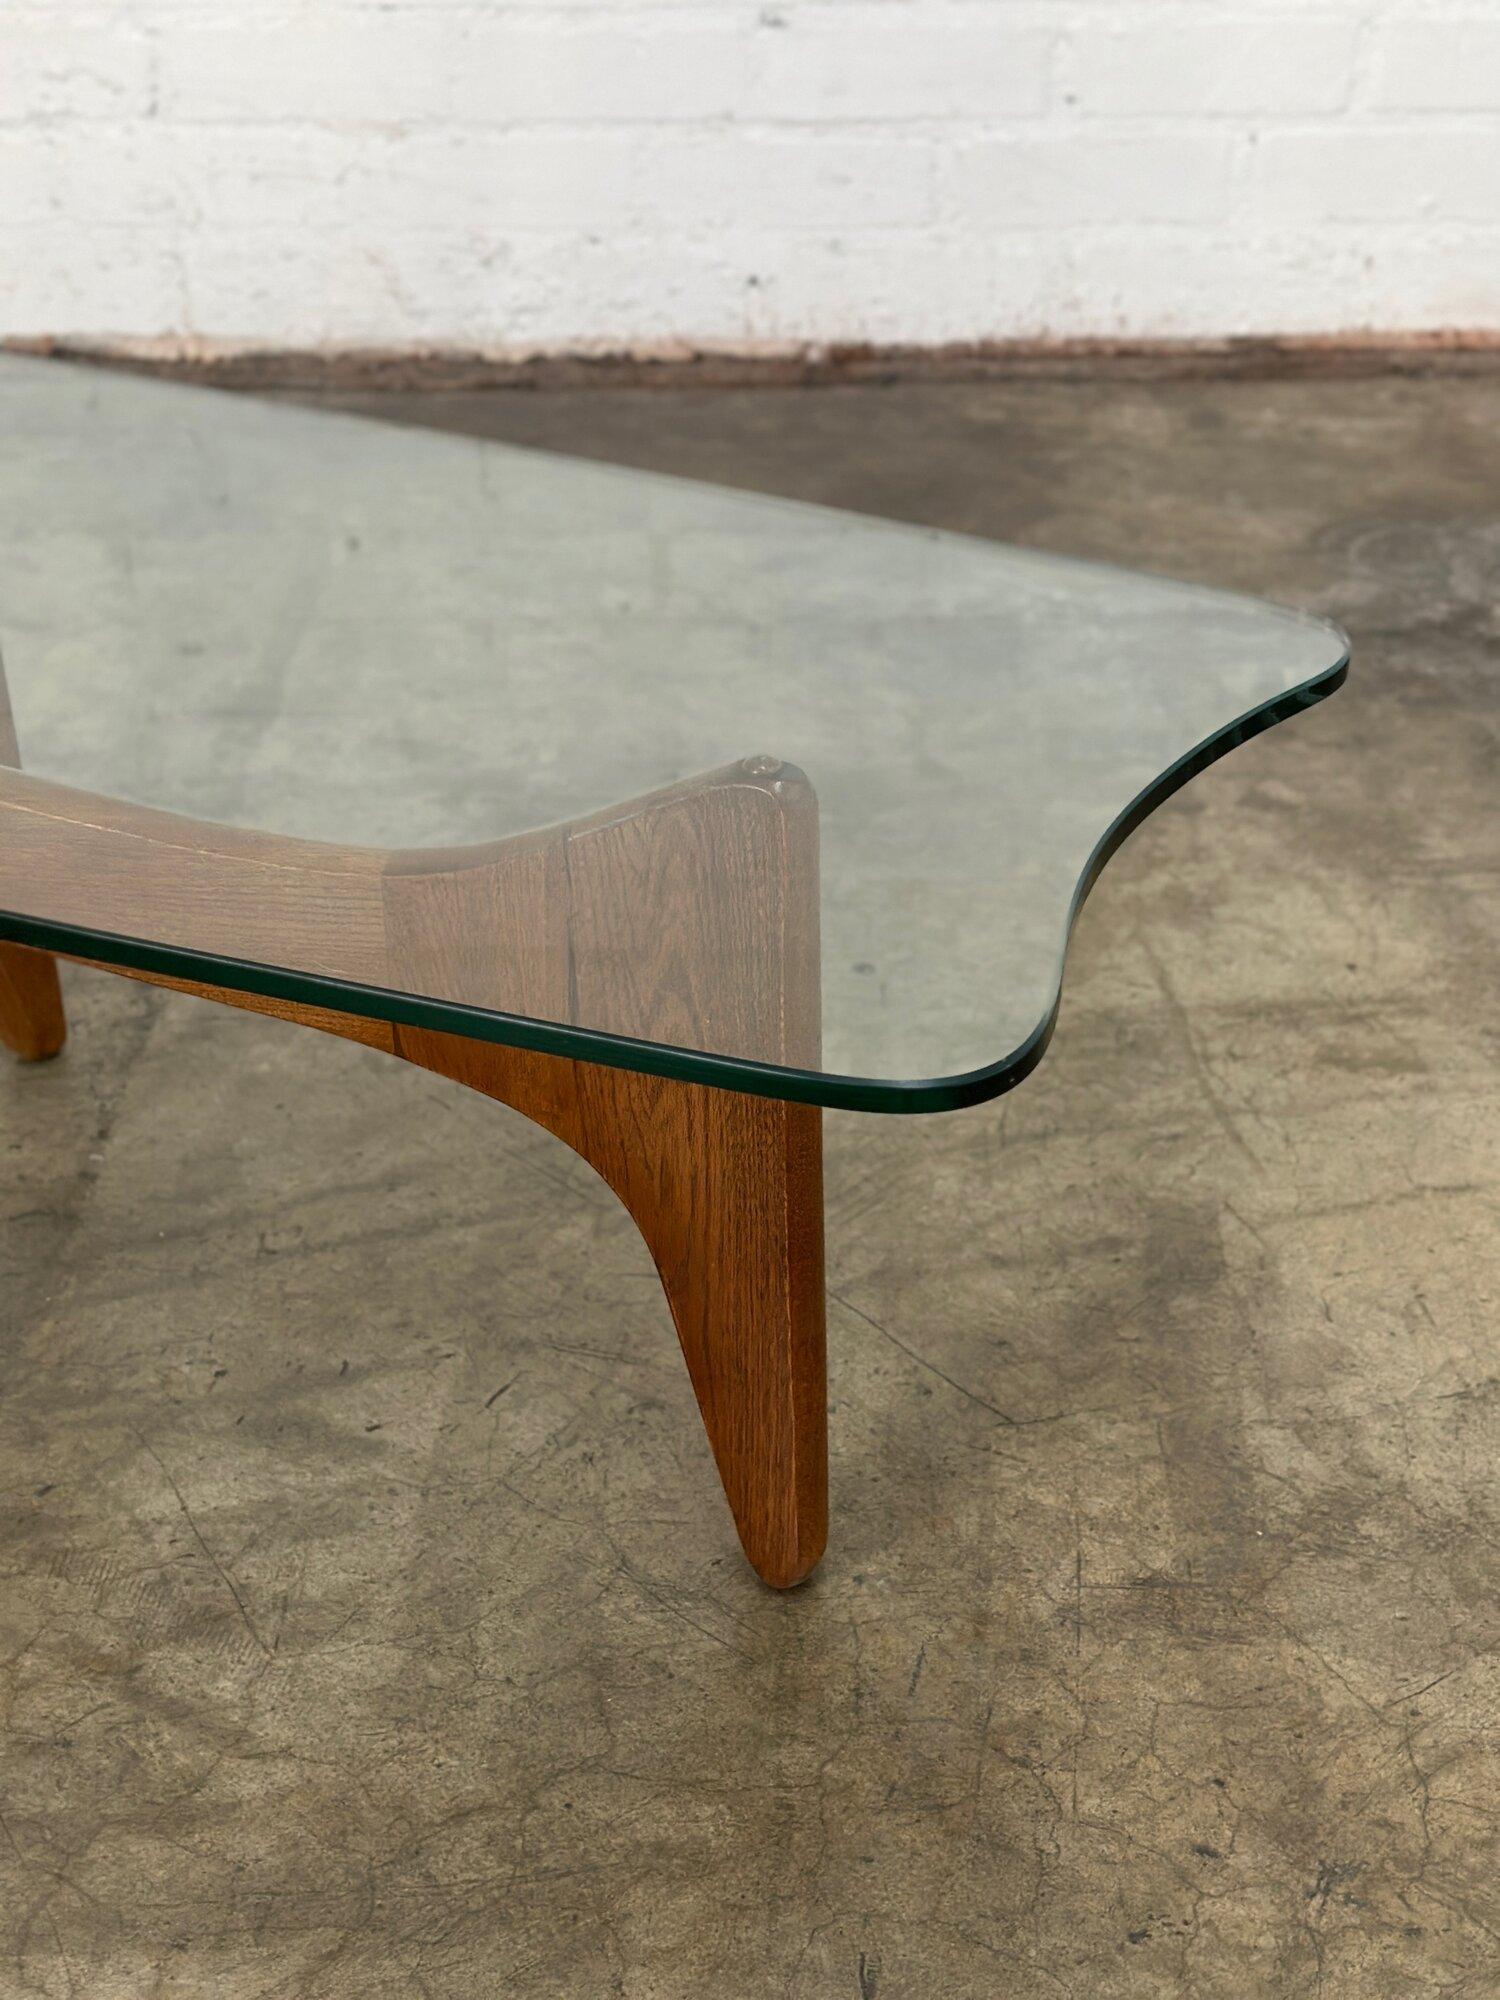 W59.5 W57 D20 H16

Refinished oak and glasss coffee table in great condition.  Oak has been done in a light walnut finish. Item features a great sculpted glass and an angular wooden base. Glass has no visible chips or breaks.